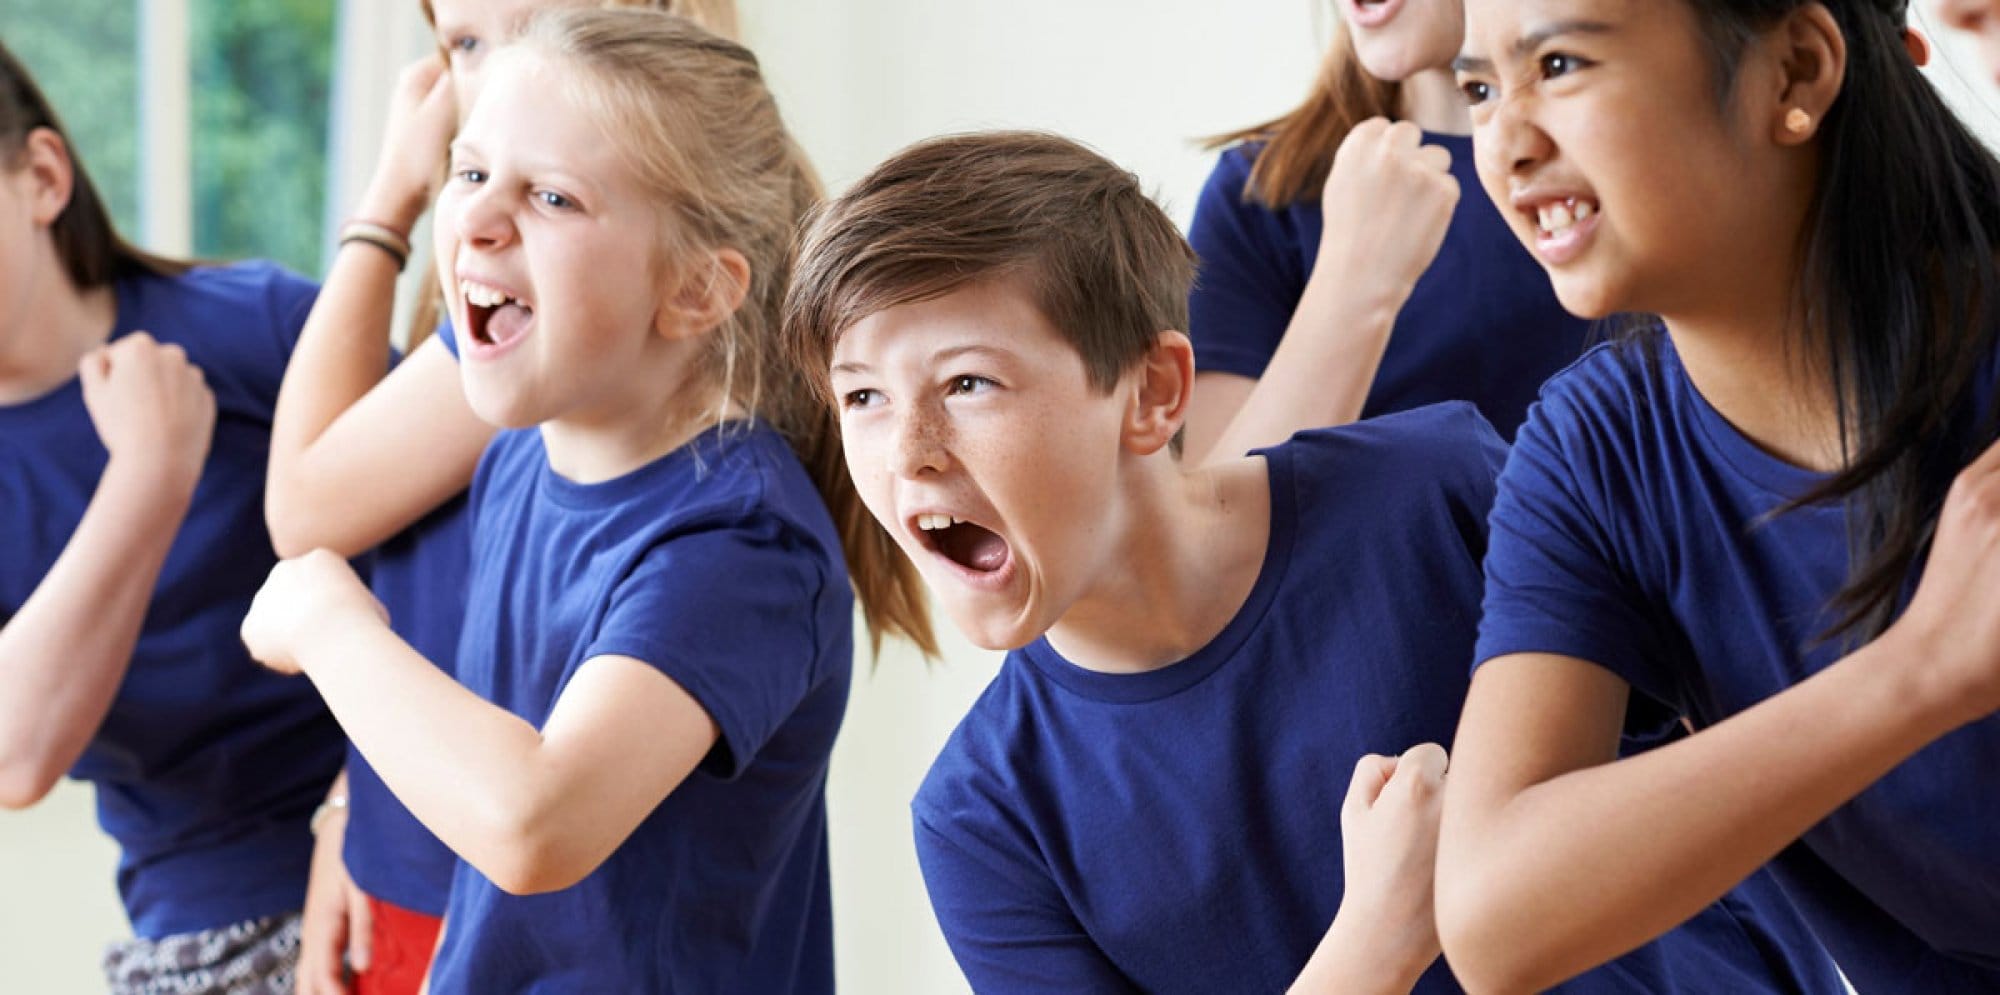 A group of young people in matching blue shirts perform musical theatre. Their mouths are open in song as they all co-ordinate their arm movements as part of their choreography.